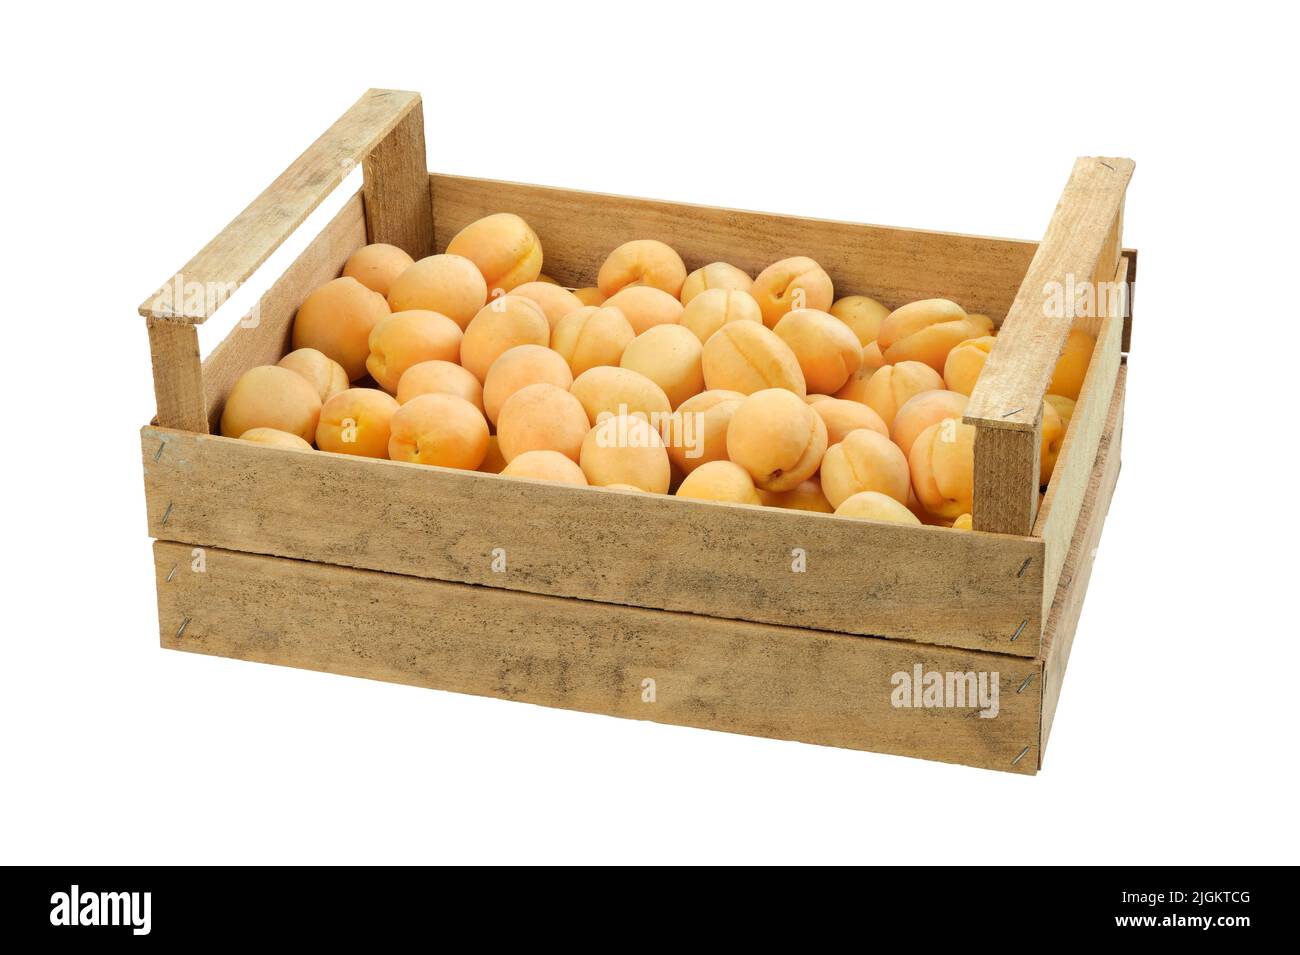 Wooden crate full of fresh ripe apricots, isolated on white background. Stock Photo